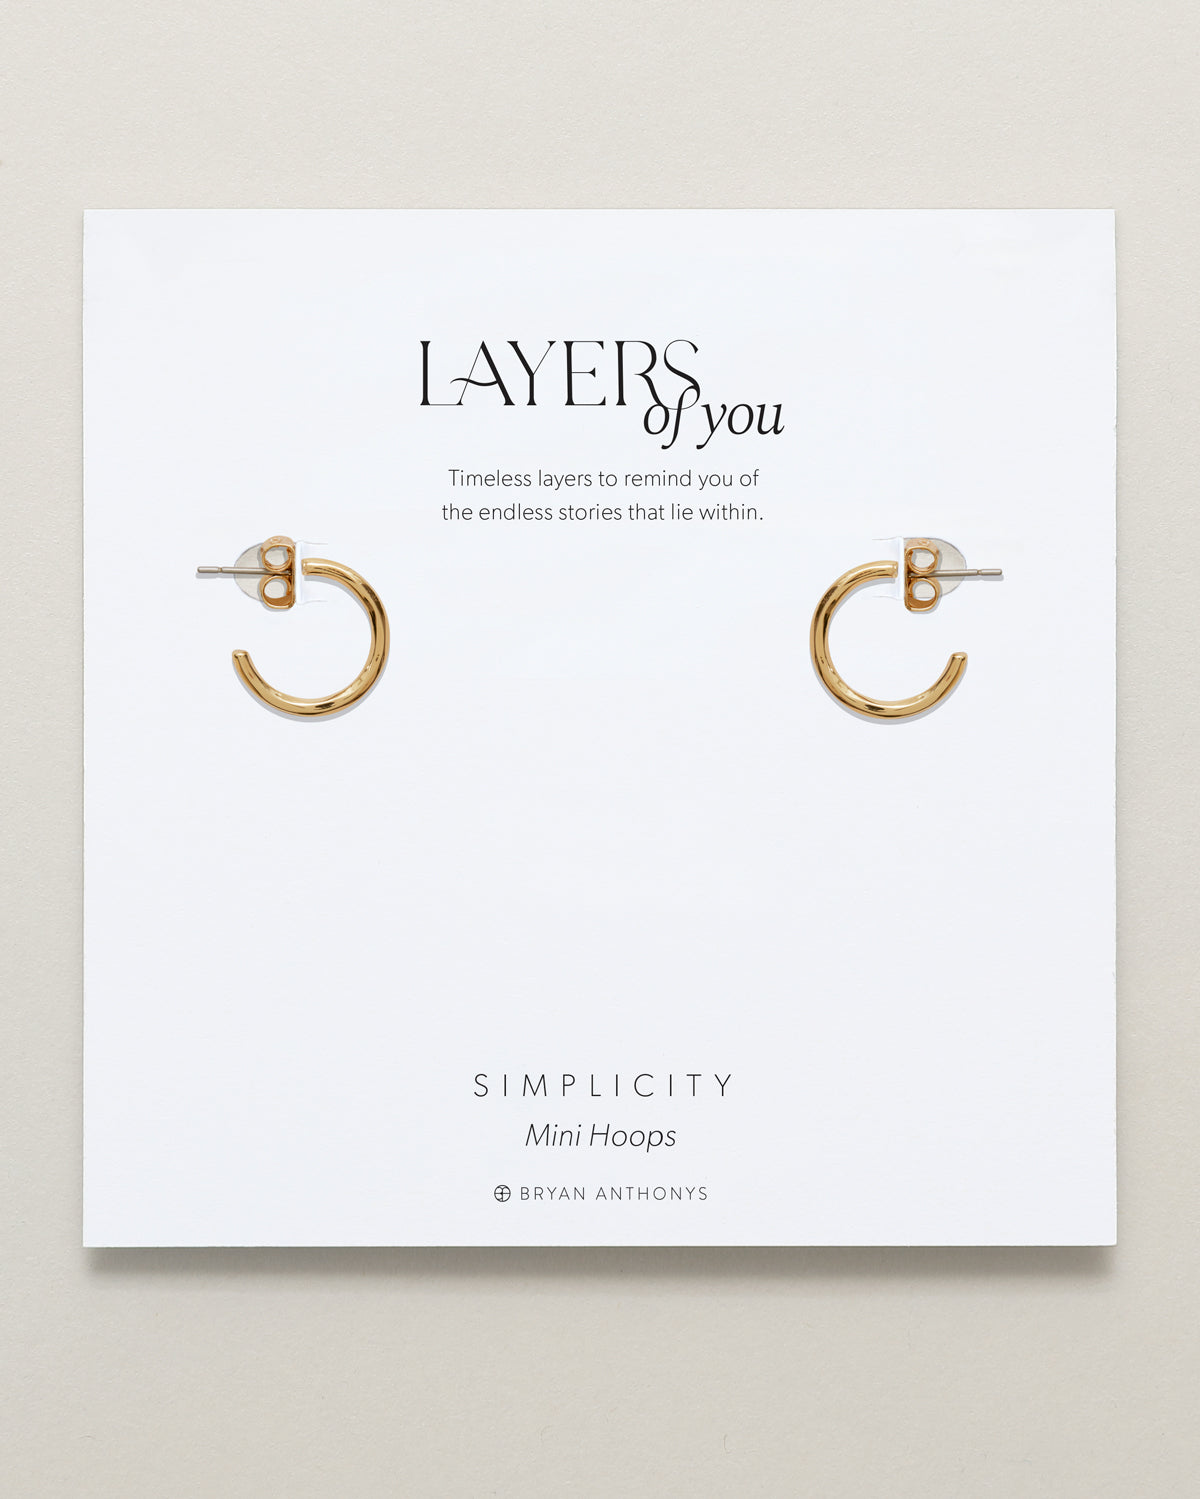 Bryan Anthonys Layers of You Gold Simplicity Mini Hoops On Card